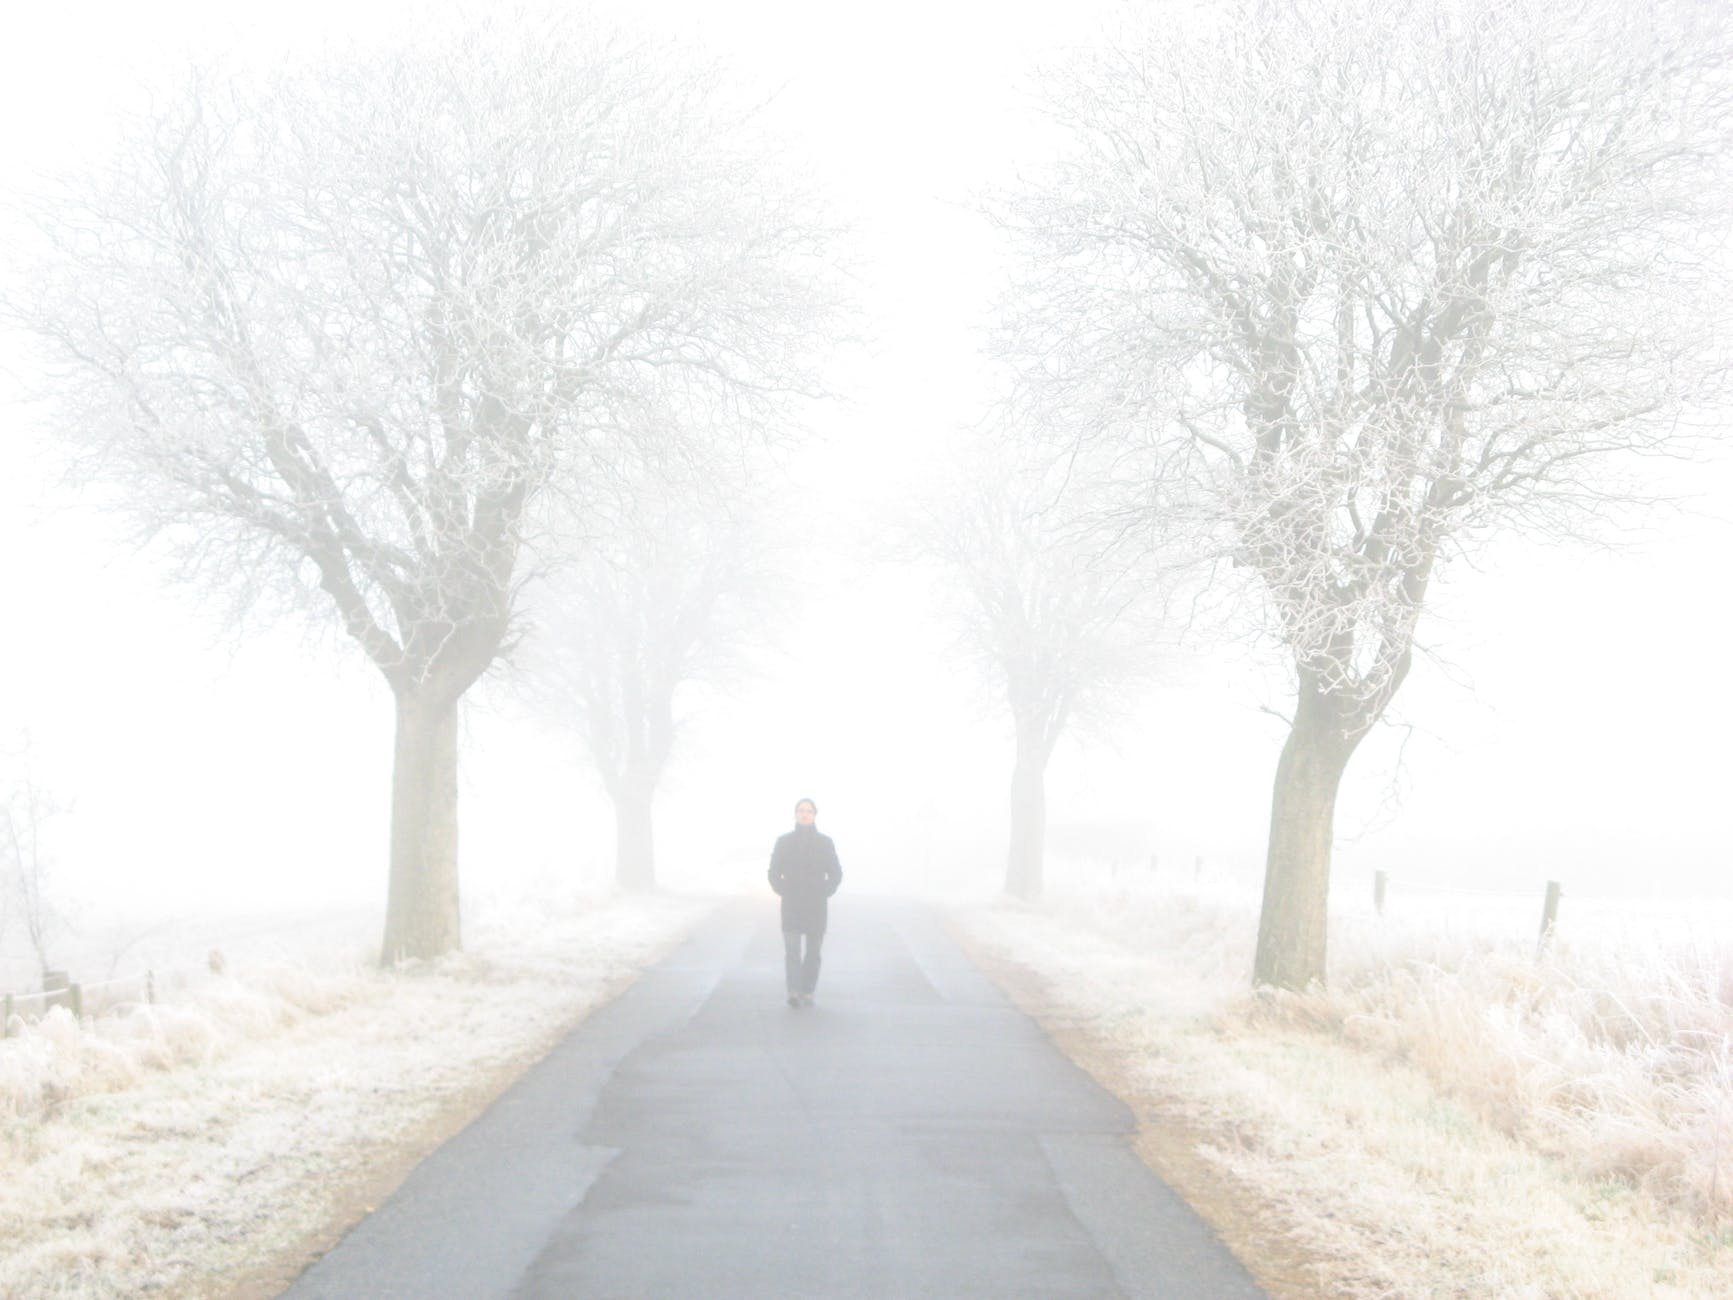 man standing on road between bare trees